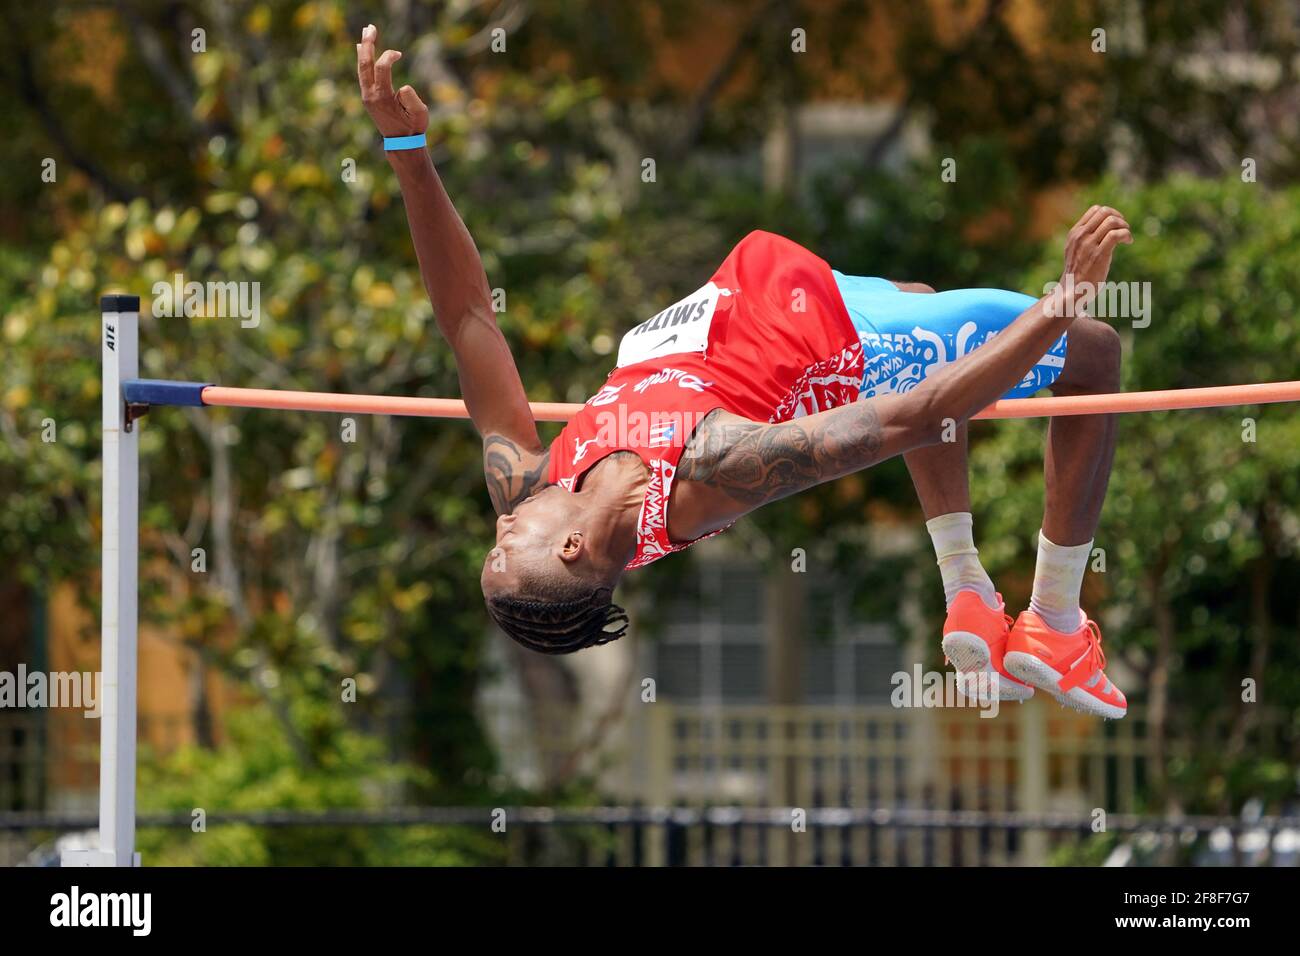 David Smith (PUR) places third in the high jump at 7-2 1/2 (2.20m) during the Miramar Invitational, Saturday, April 10, 2021, in Miramar, Fla. Stock Photo